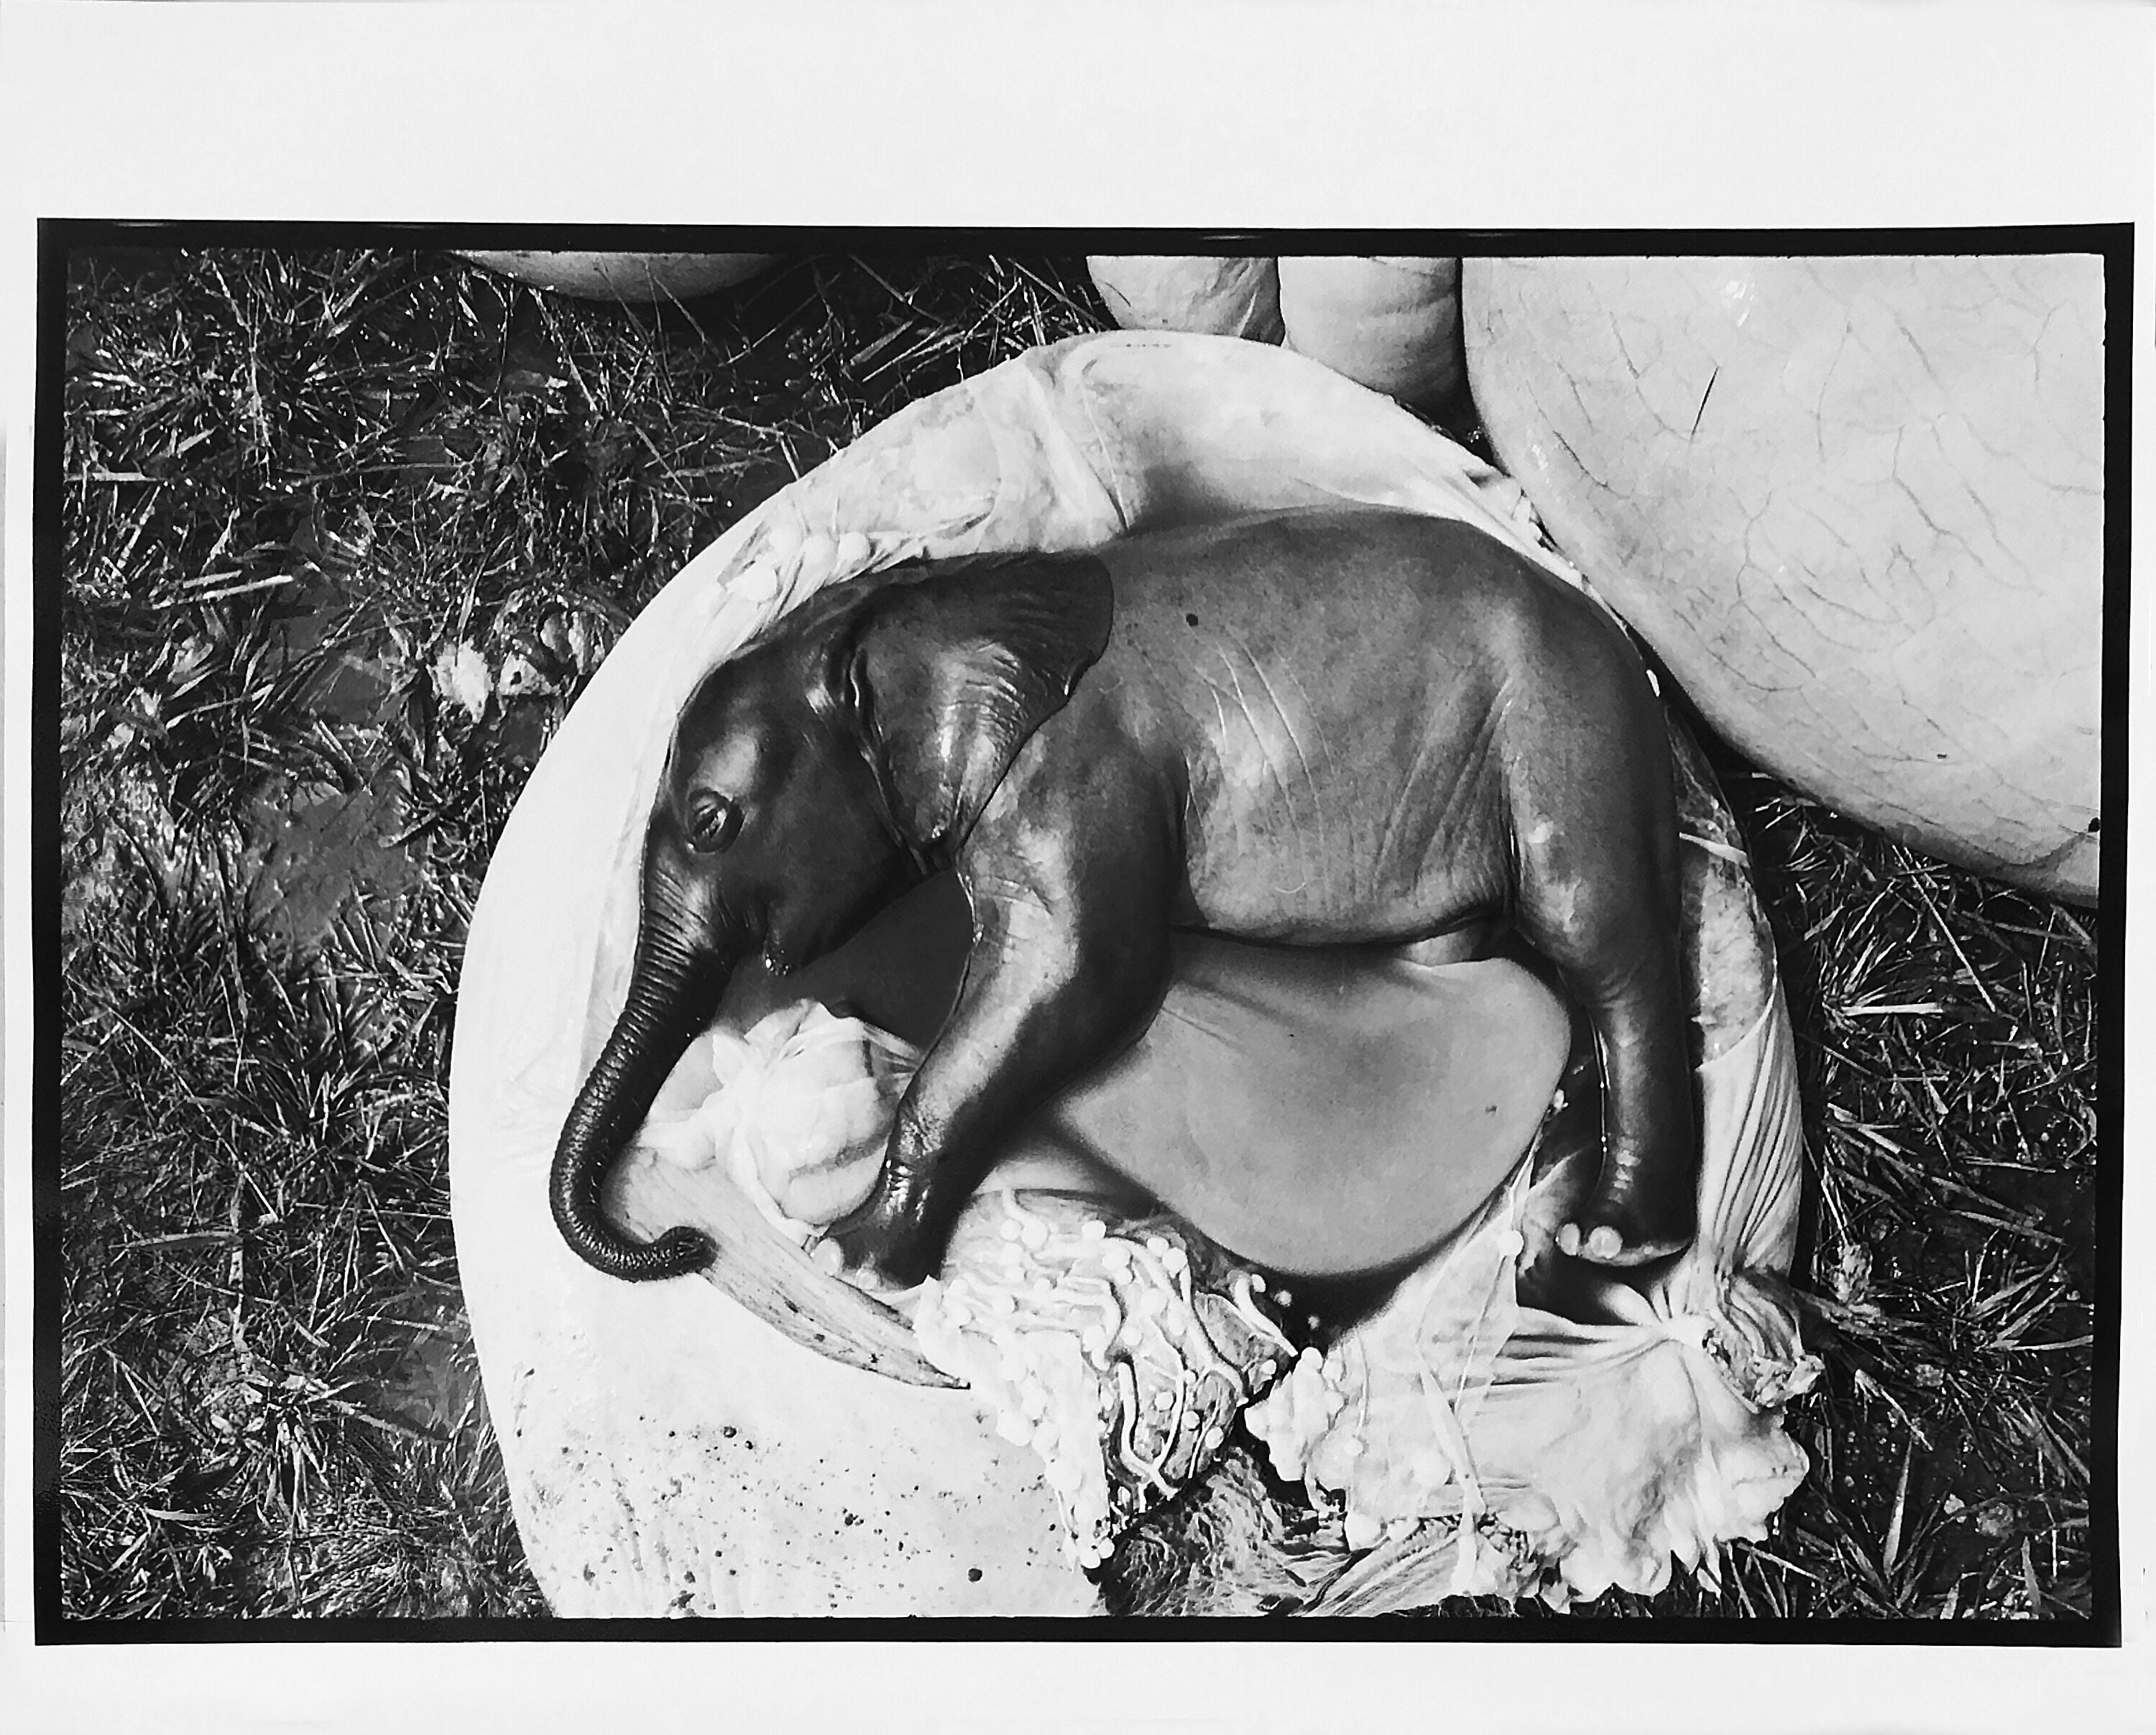 Elephant's Embryo, Uganda
Peter Beard/Unsigned
The original photograph "unsigned" but documented by its inclusion in "Peter Beard - Fifty Years of Portraits, The End of the Game, Eyelids of Morning, and many others.
Image size: 16 in. H x 20 in.